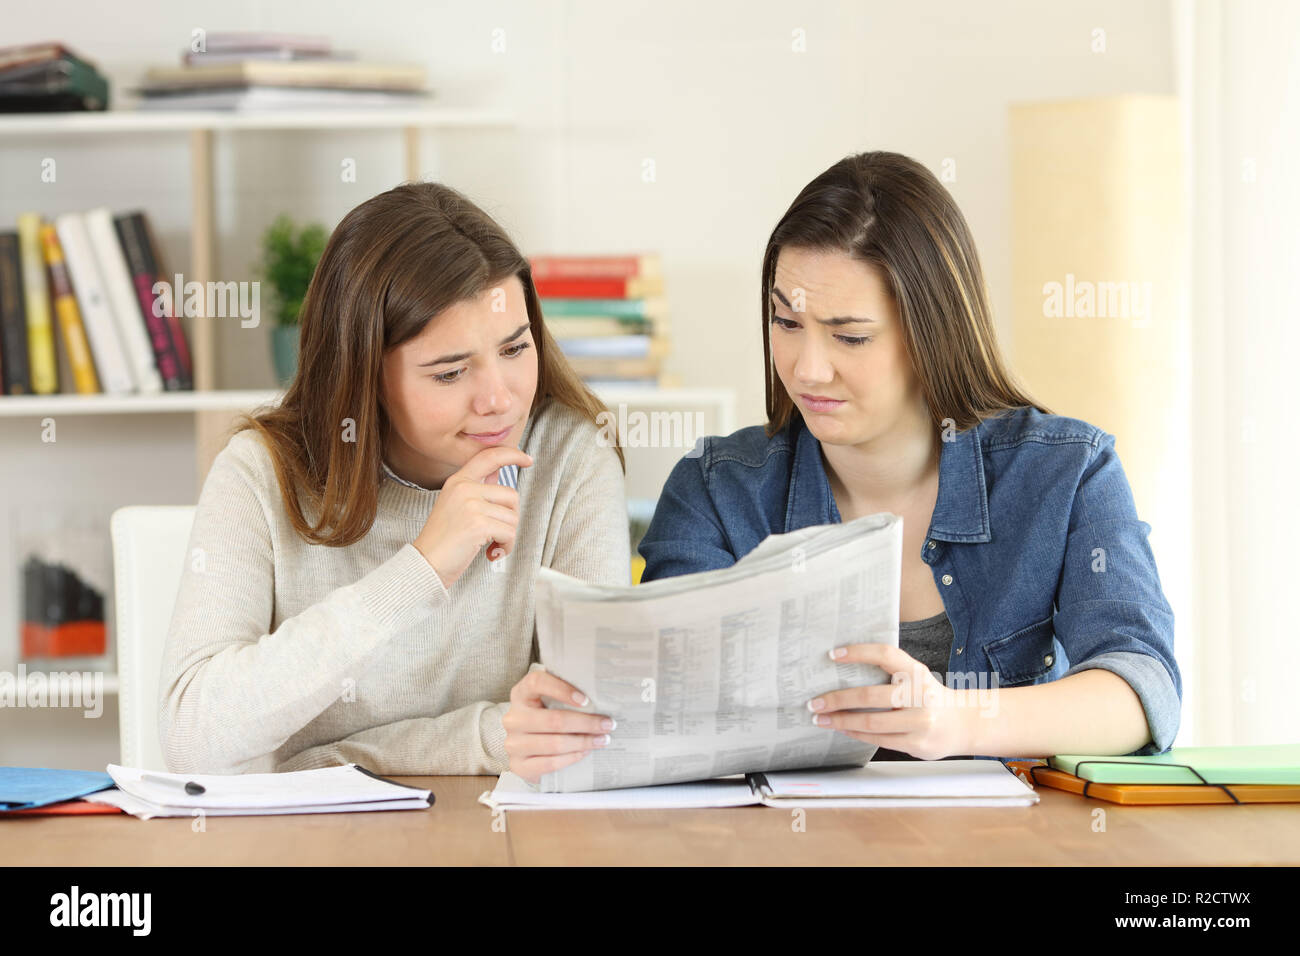 Front view portrait of two students finding suspicious news in a newspaper at home Stock Photo